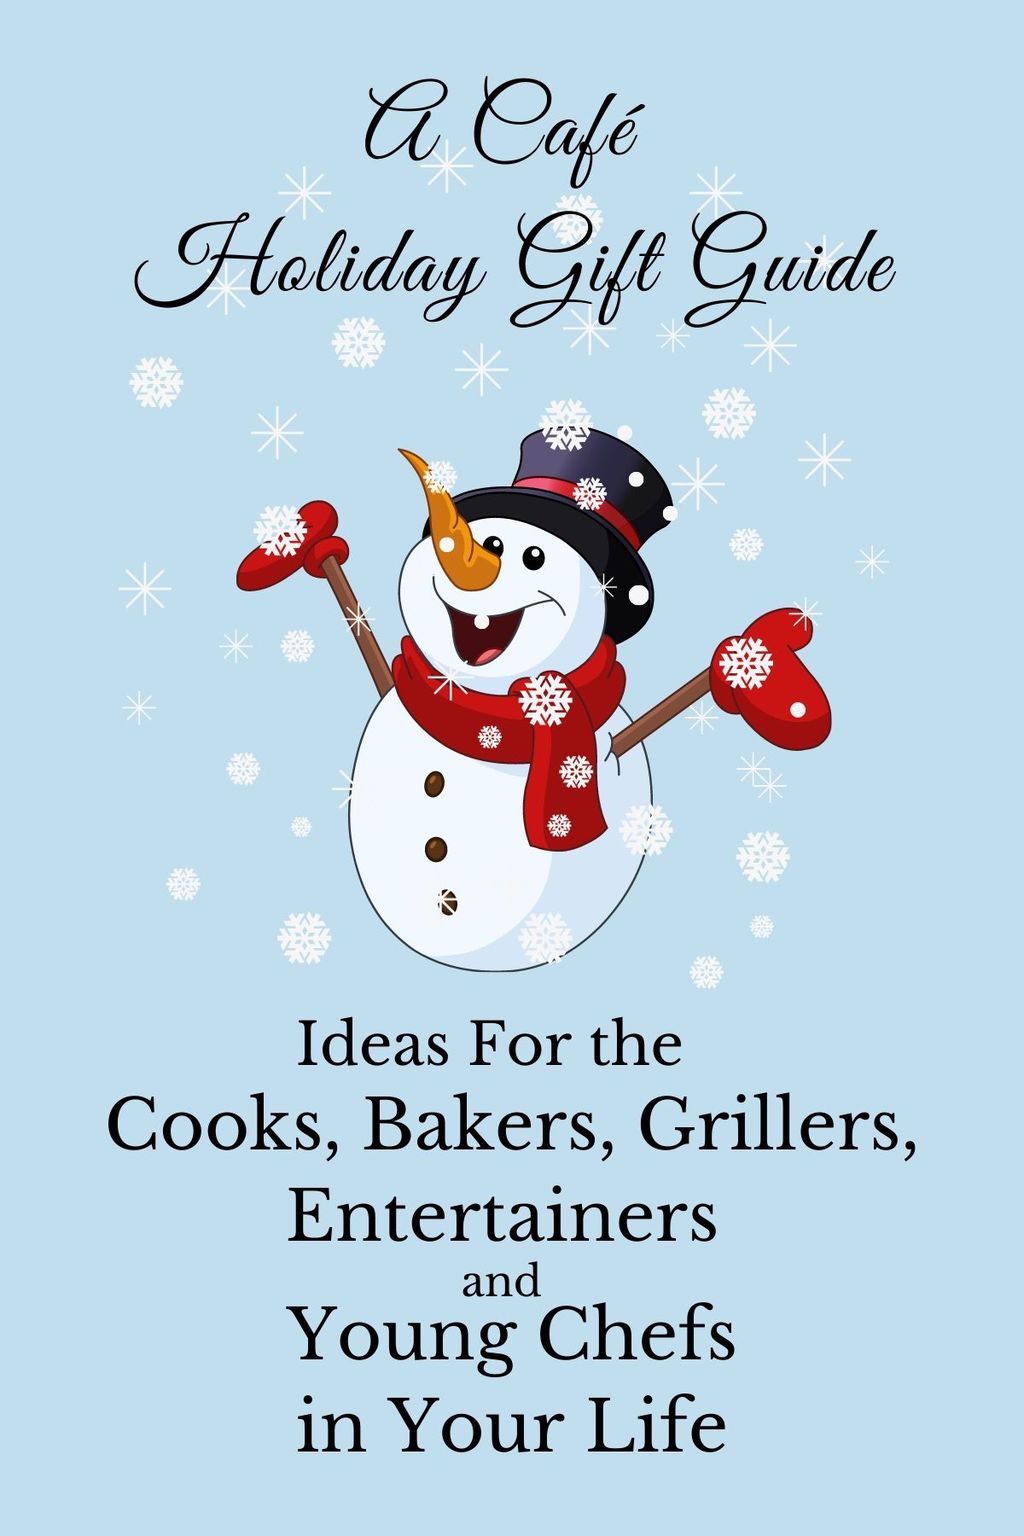 A 2021 Holiday Gift Guide from The Café